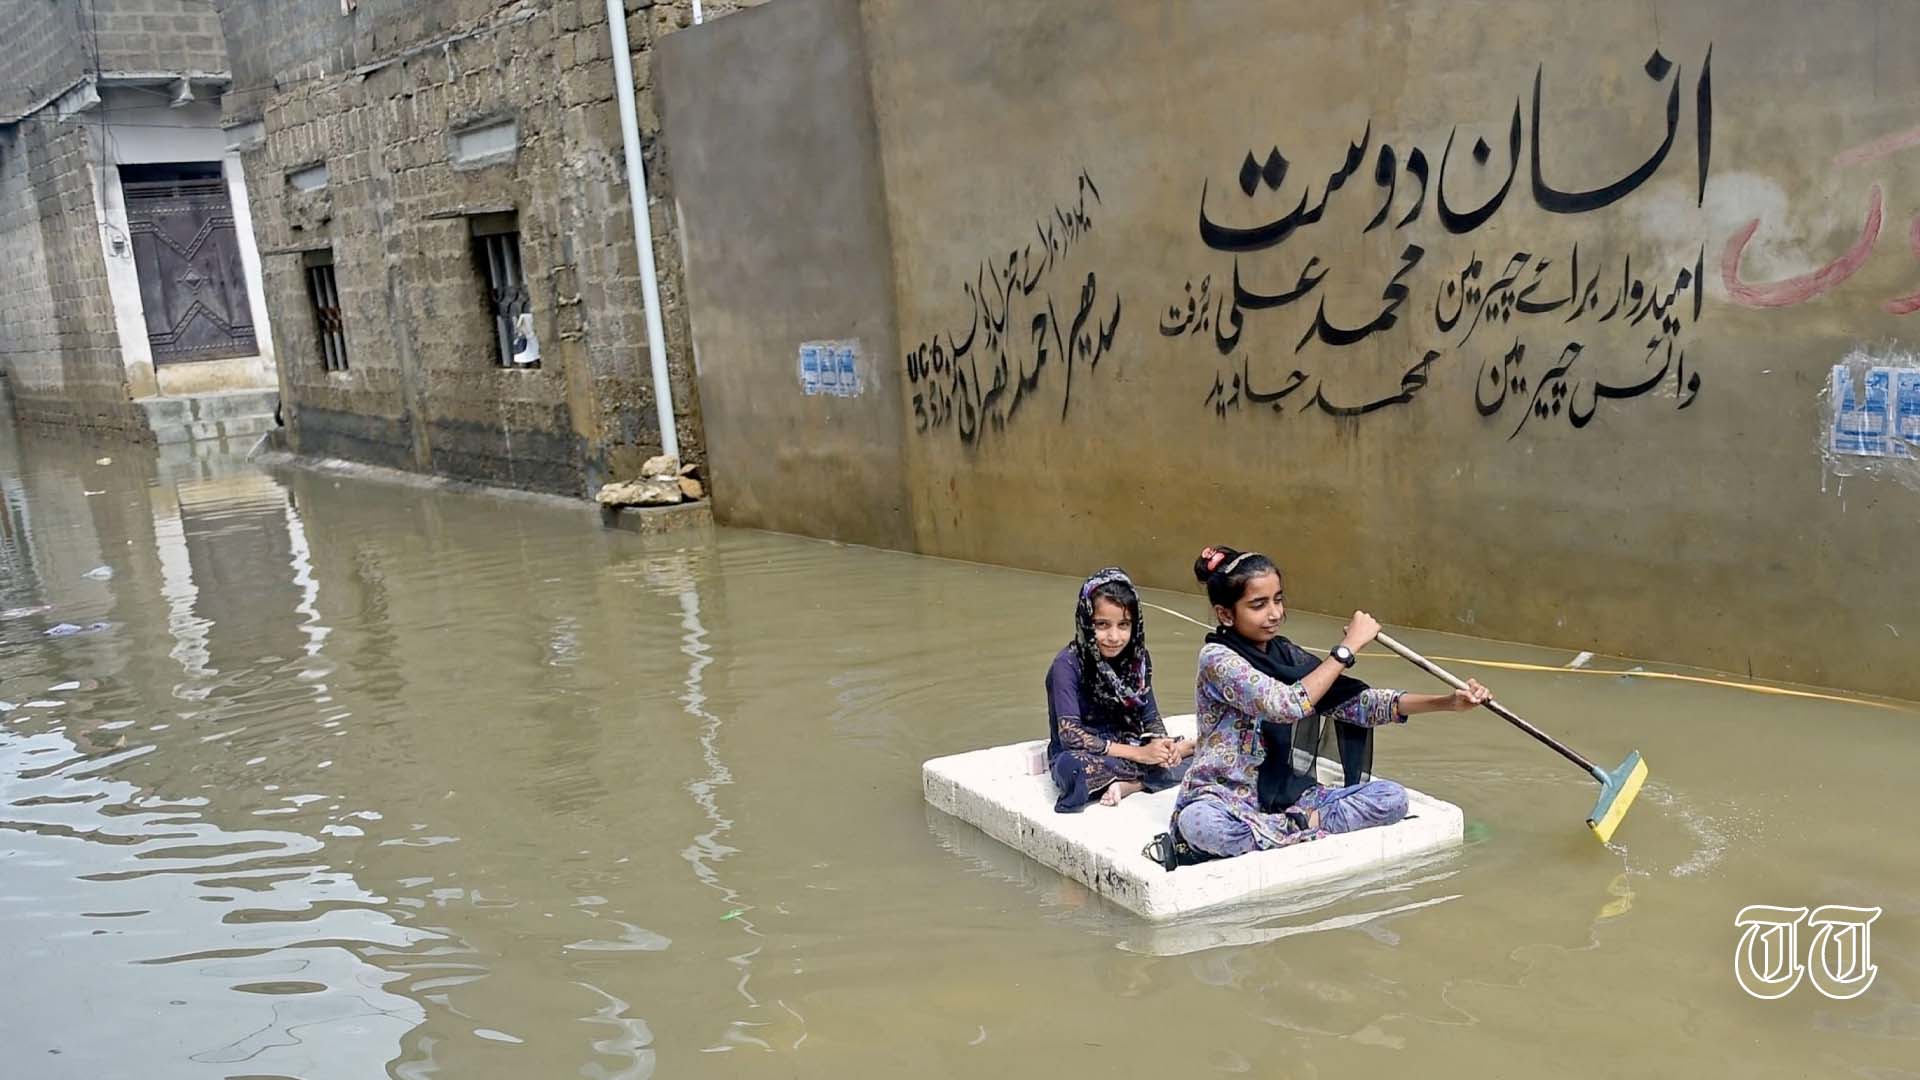 A file photo shows children using a temporary raft for transportation in Karachi.